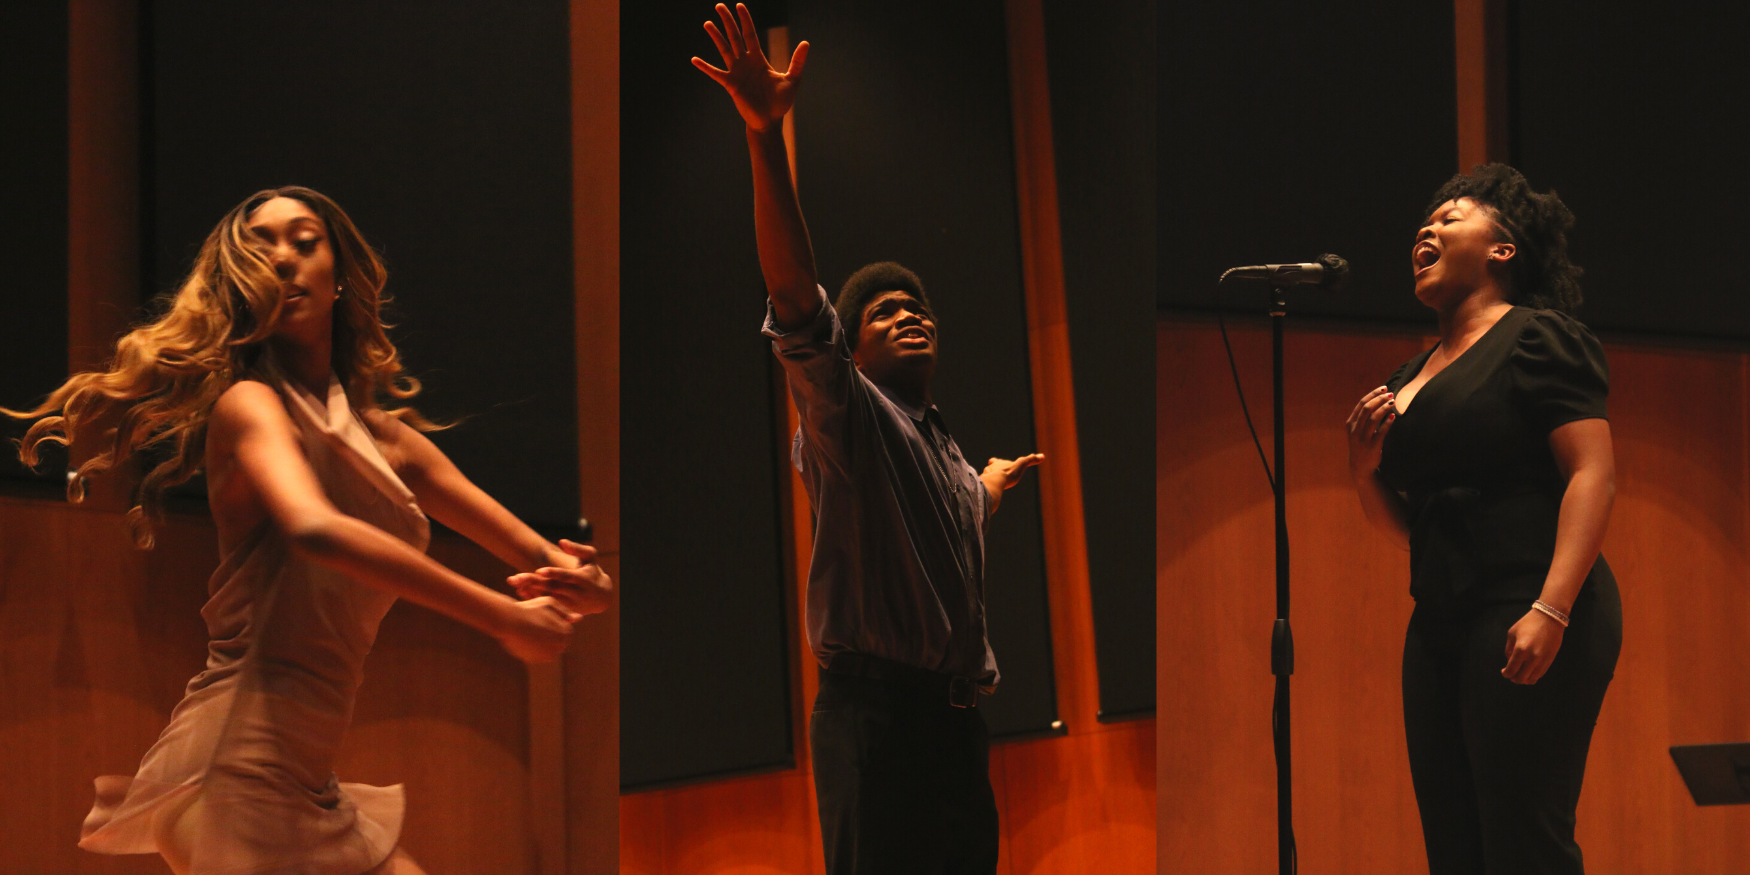 From left to right, there is a Black dancer with her arms rounded in front of her, her hair tossed behind her. She is wearing a neutral color outfit and pictured mid-move. Next to her is a Black male poet wearing a grey shirt and black pants, his arms reaching above his head. Next to him is a Black female singer waring concert black, singing passionately into the microphone.